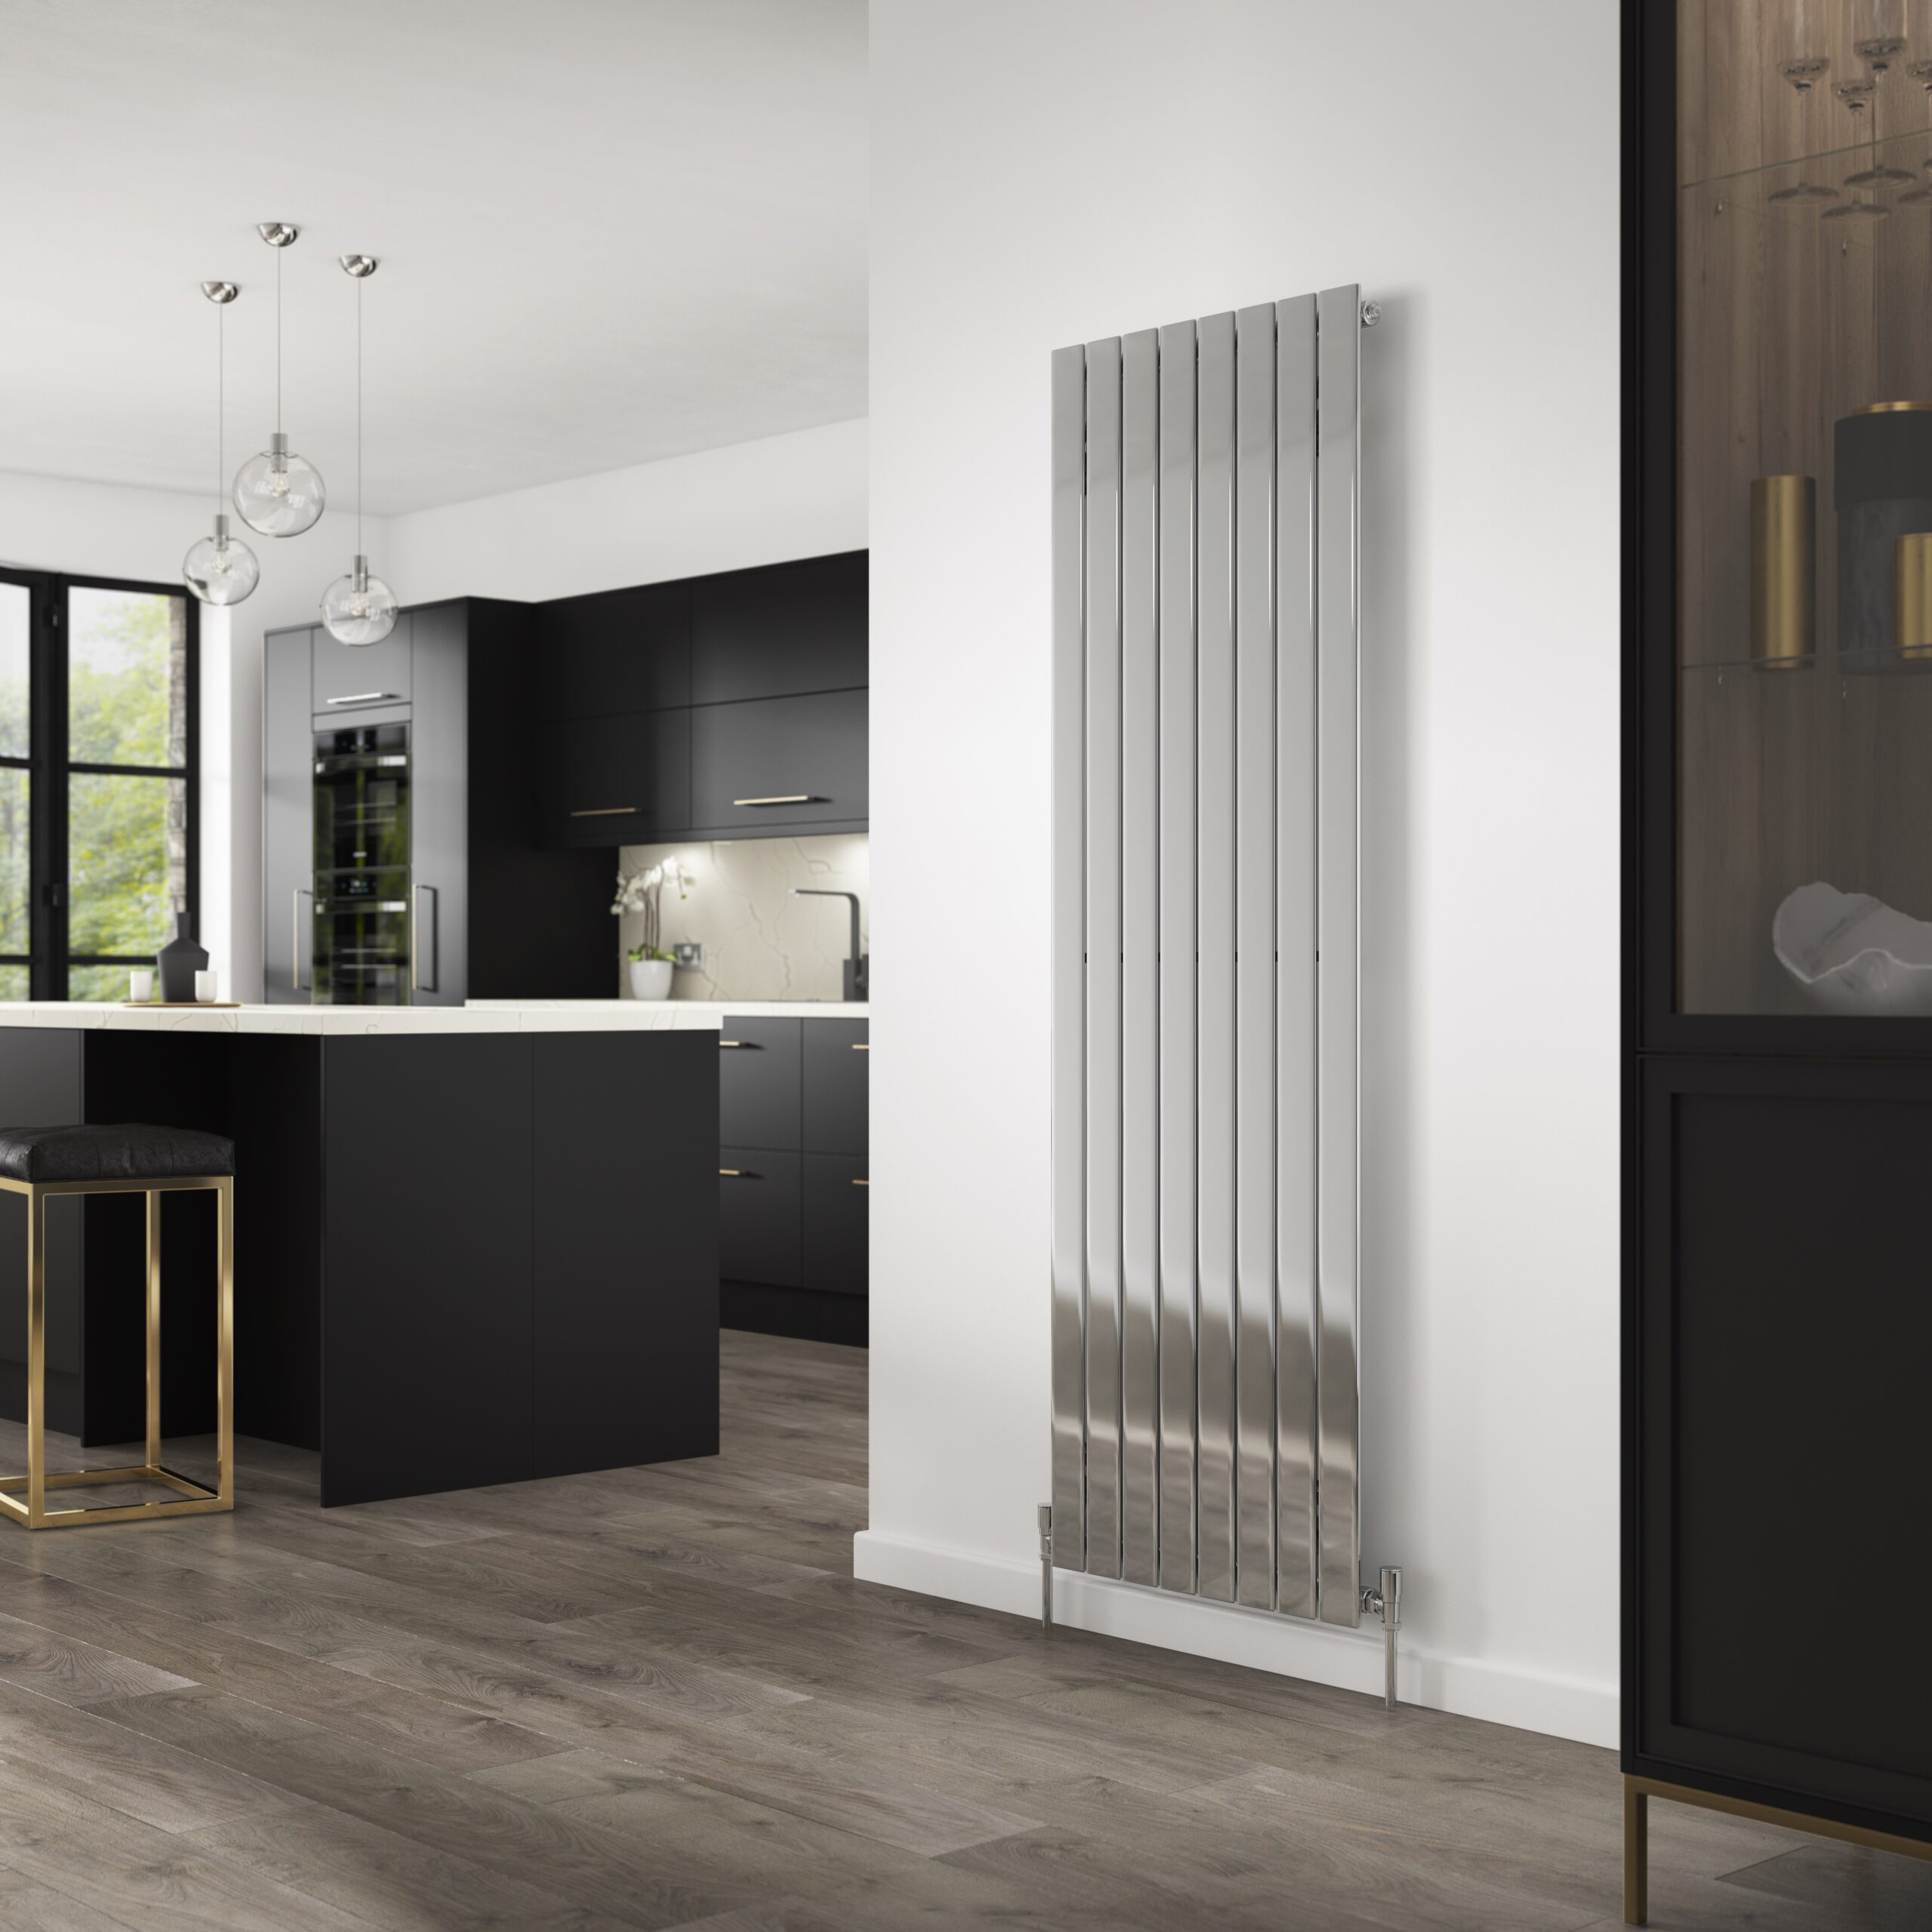 STELRAD LAUNCHES NEW ‘BOUTIQUE’ SERIES FOR BATHROOMS AND KITCHENS @Stelrad